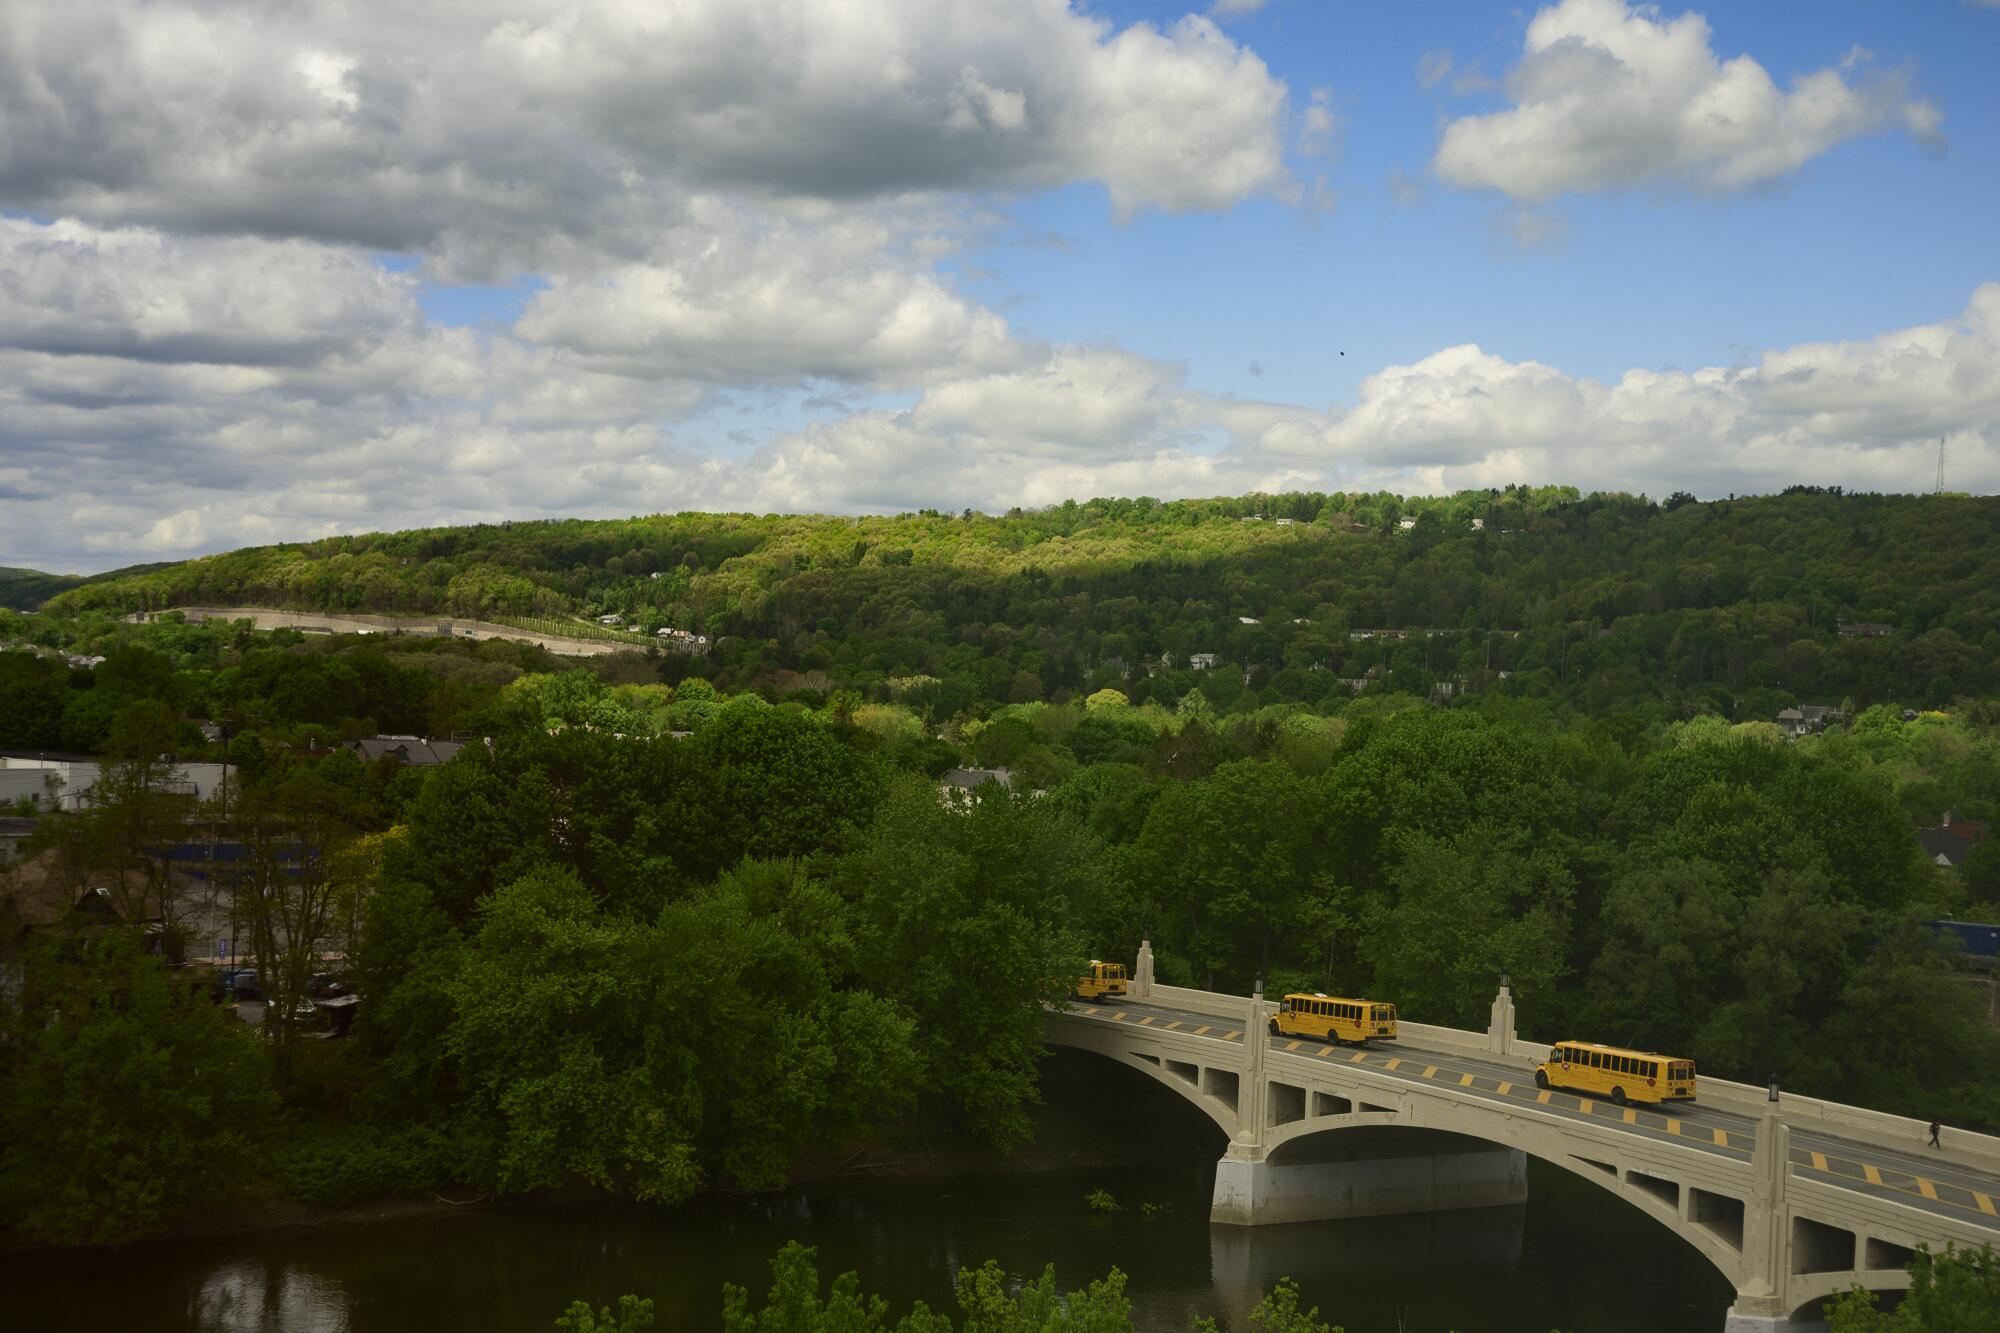 Yellow buses cross a bridge into green rolling hills.